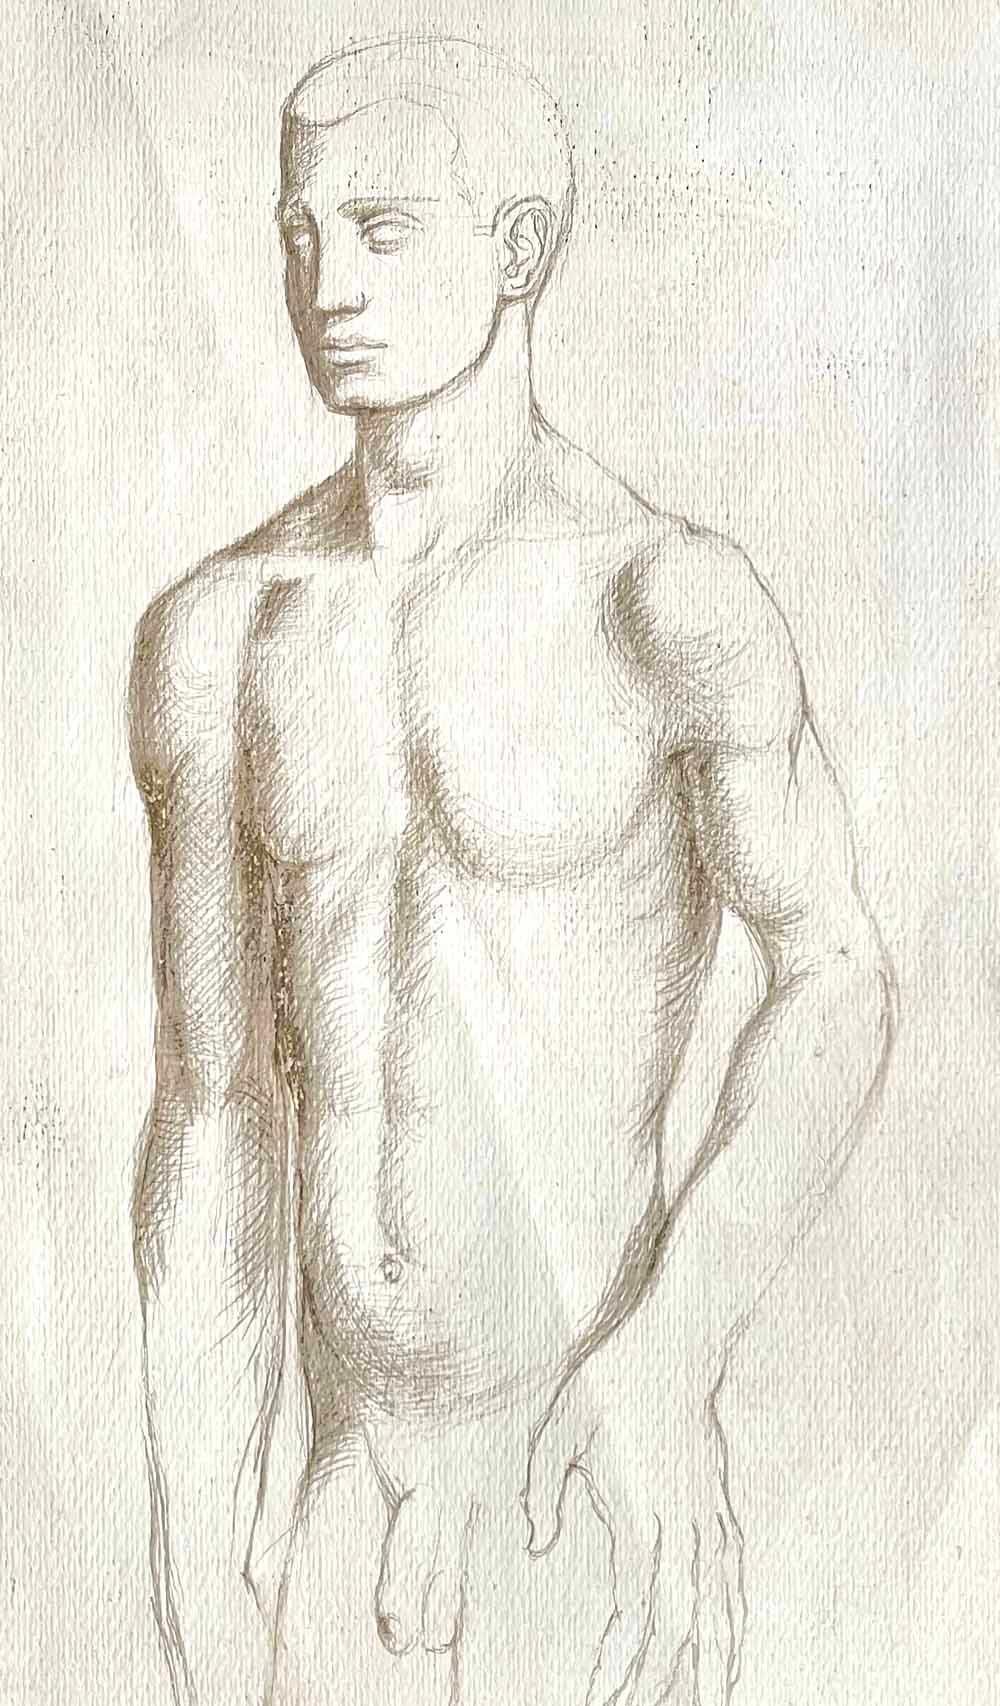 Exquisitely accomplished, this lovely male nude by Paul Goadby Stone is the earliest piece we have ever offered by the artist.  Although it has the appearance of a drawing, this work appears to be tempera on prepared paper -- a medium that allowed